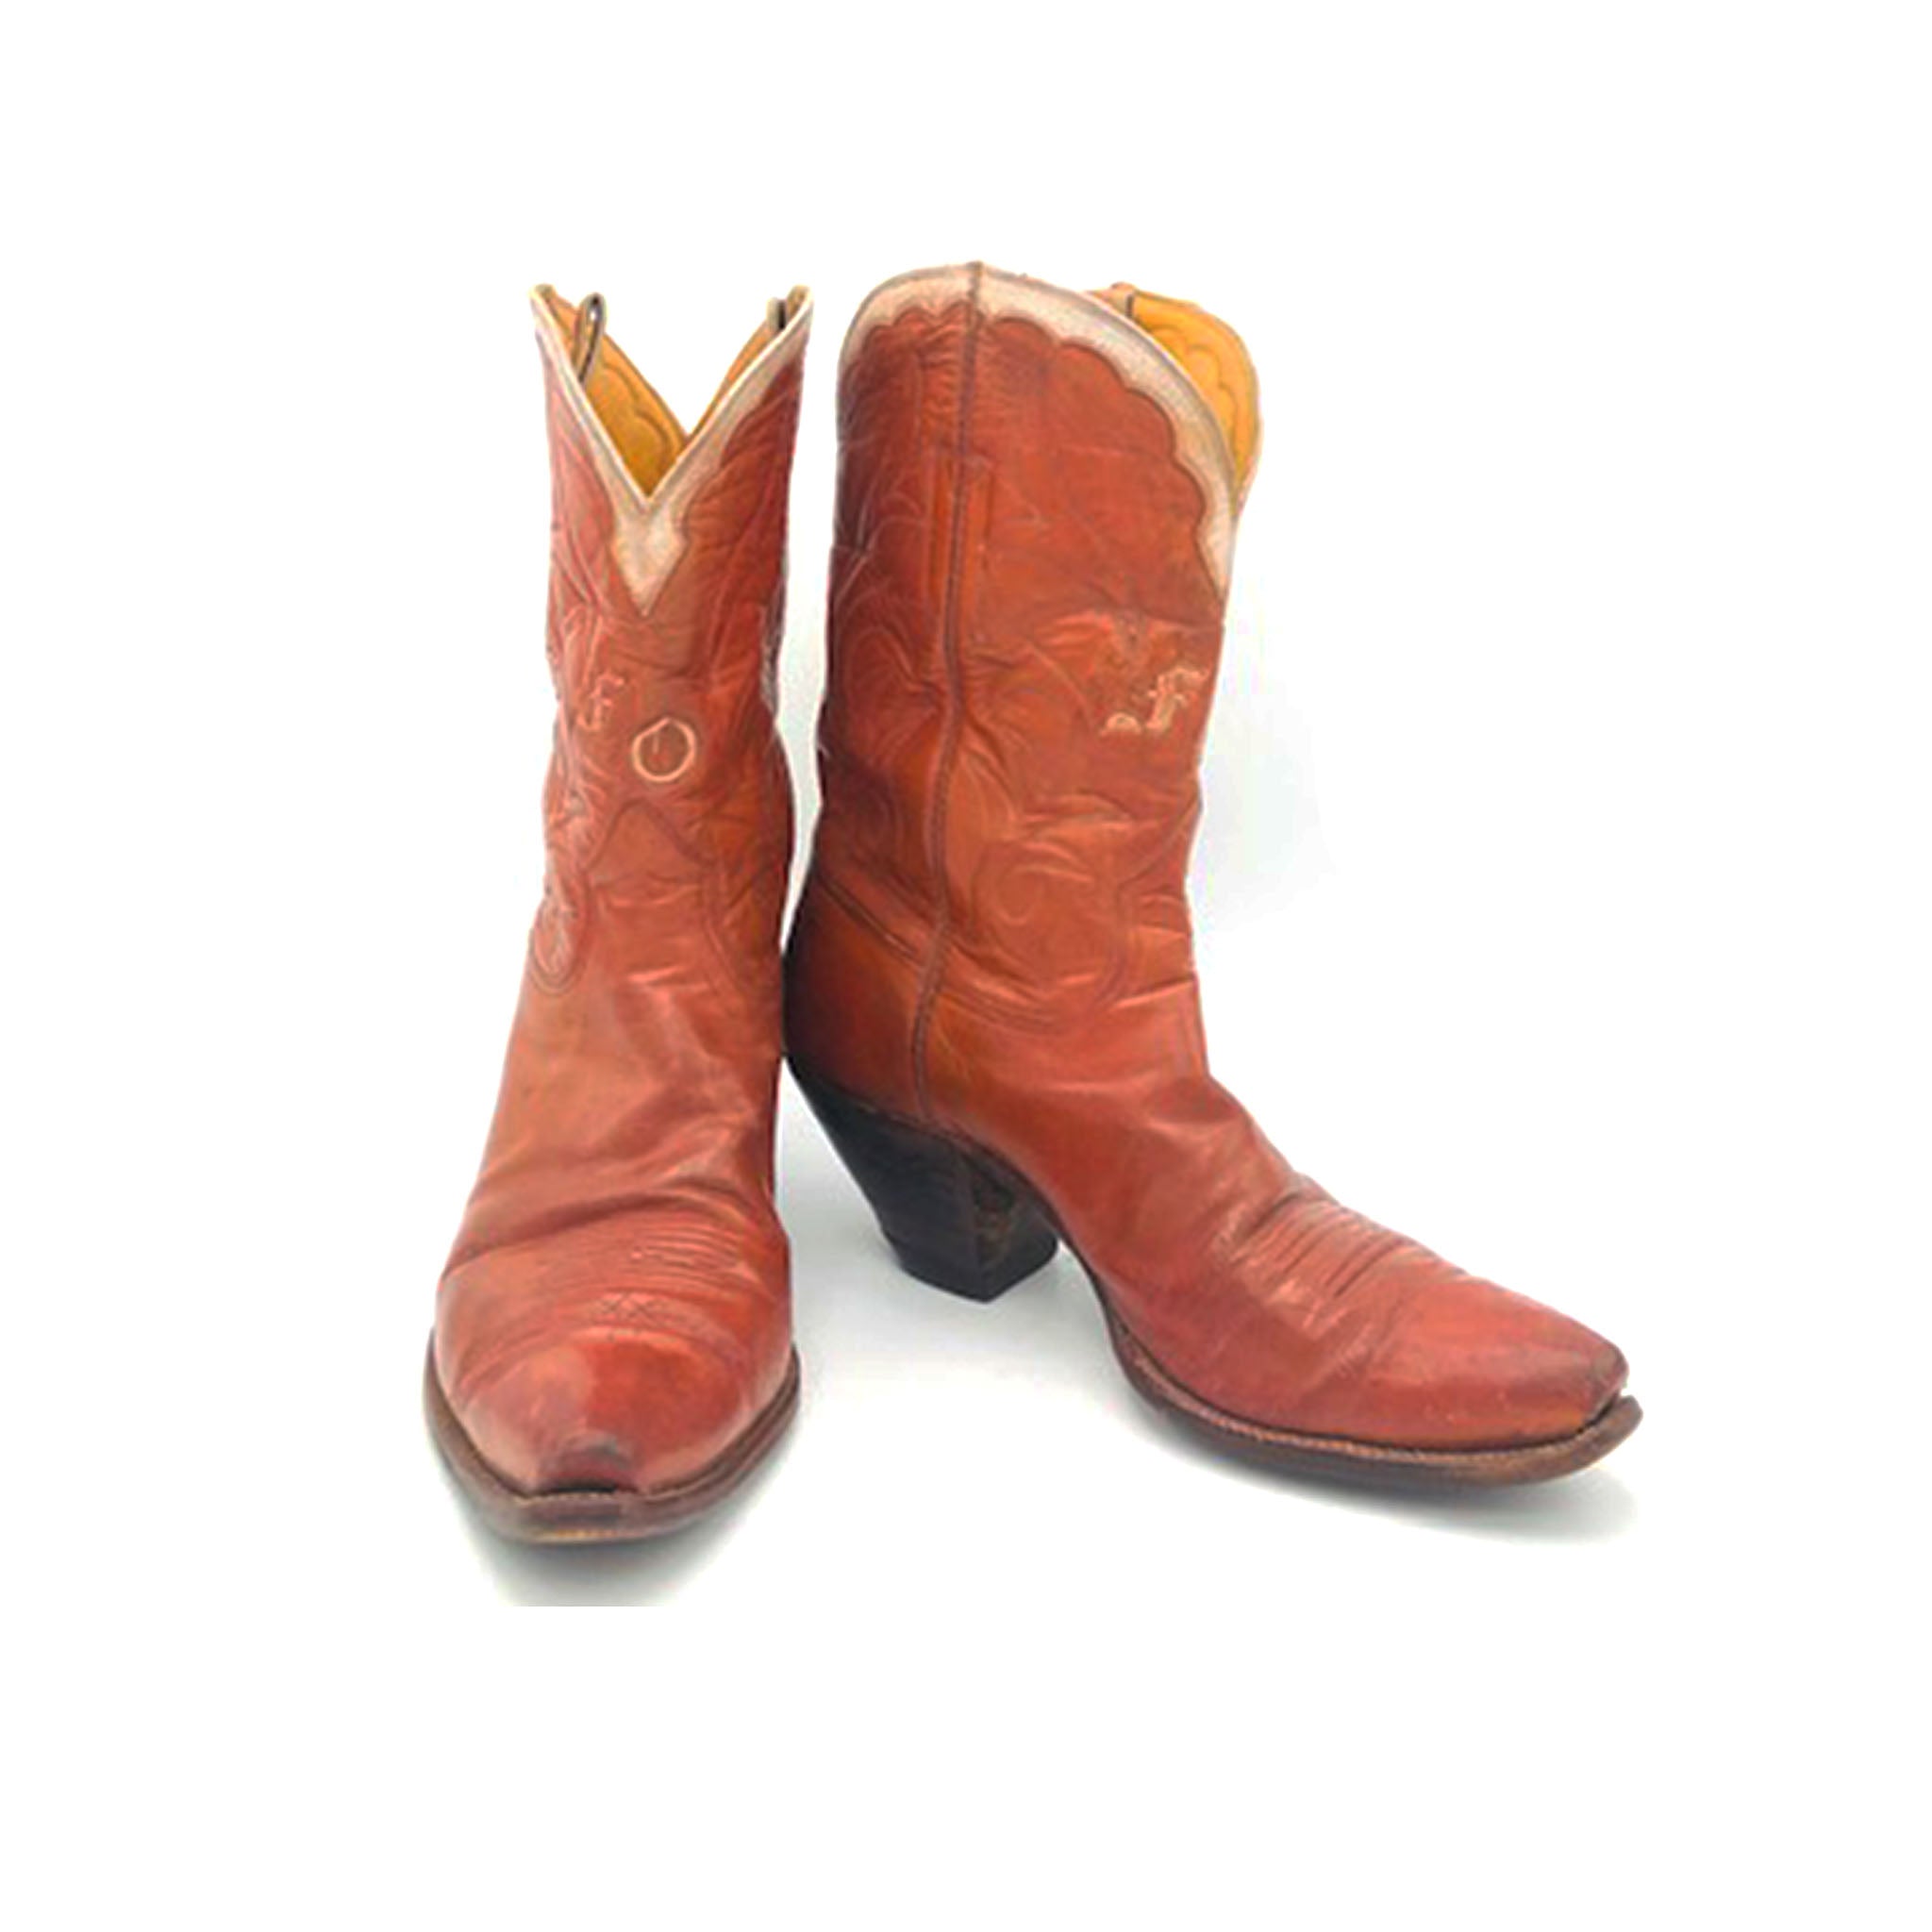 lucchese women's cowboy boots